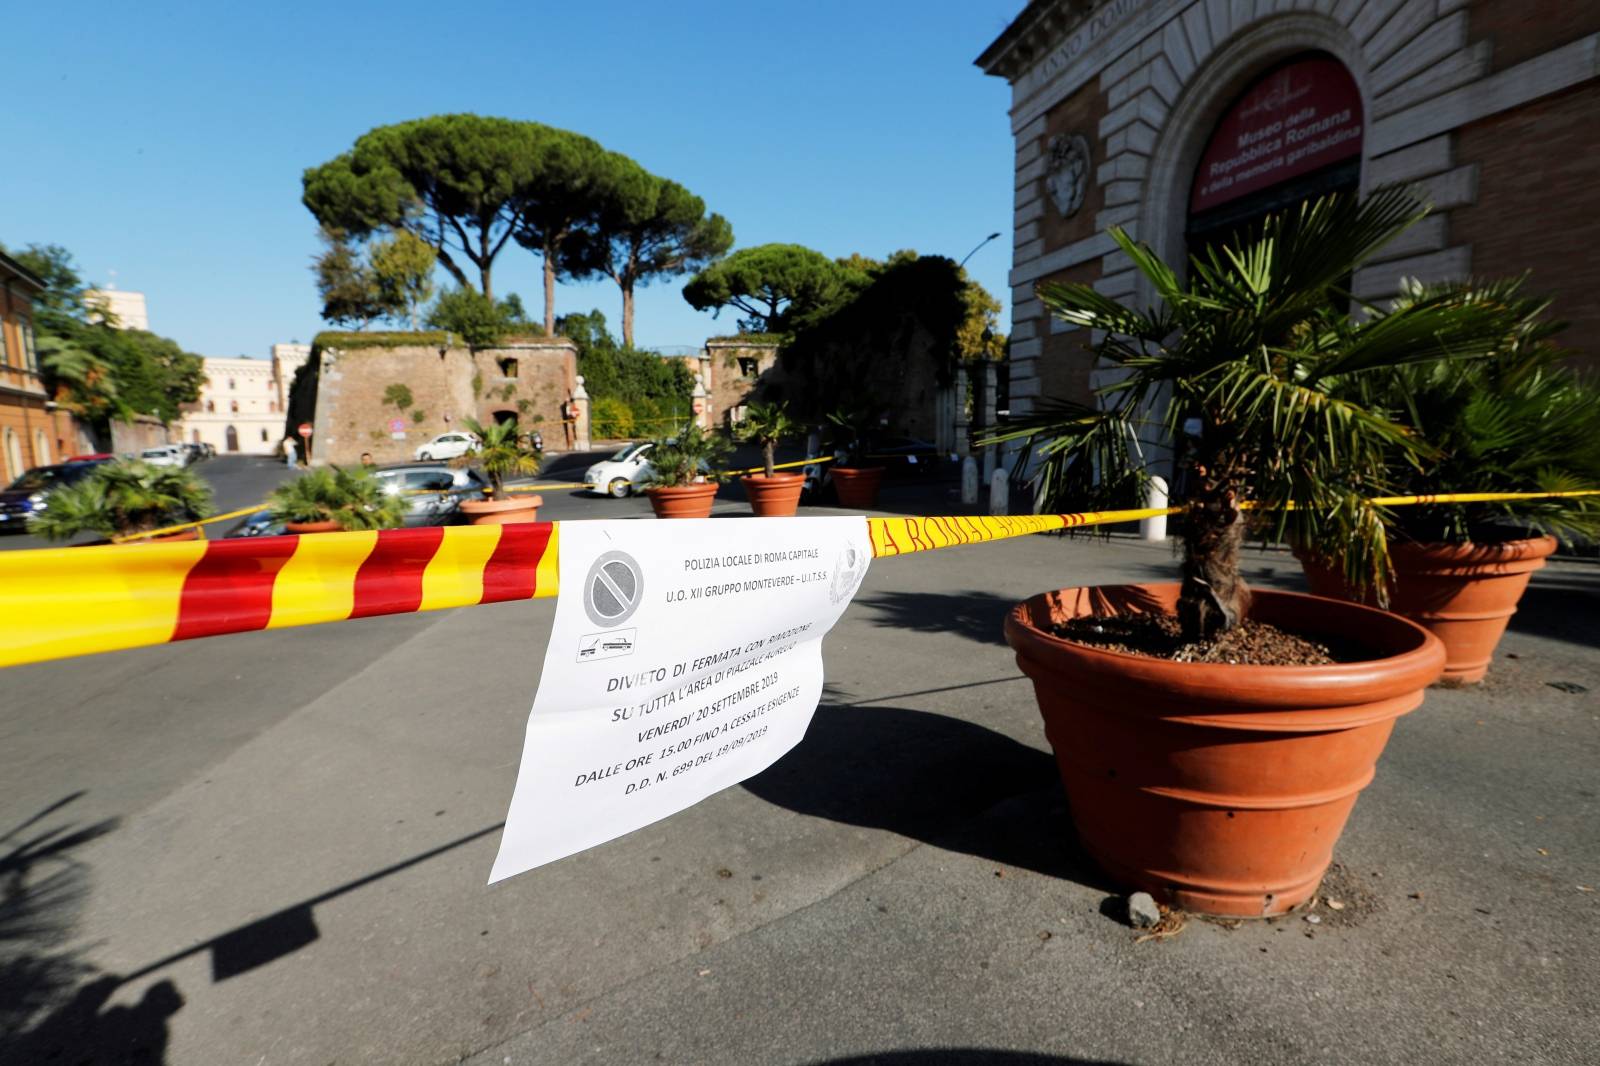 Police tape blocks the access to Villa Aurelia where the Duke and Duchess of Sussex, Prince Harry and his wife Meghan, are expected to attend the wedding of fashion designer Misha Nonoo, in Rome